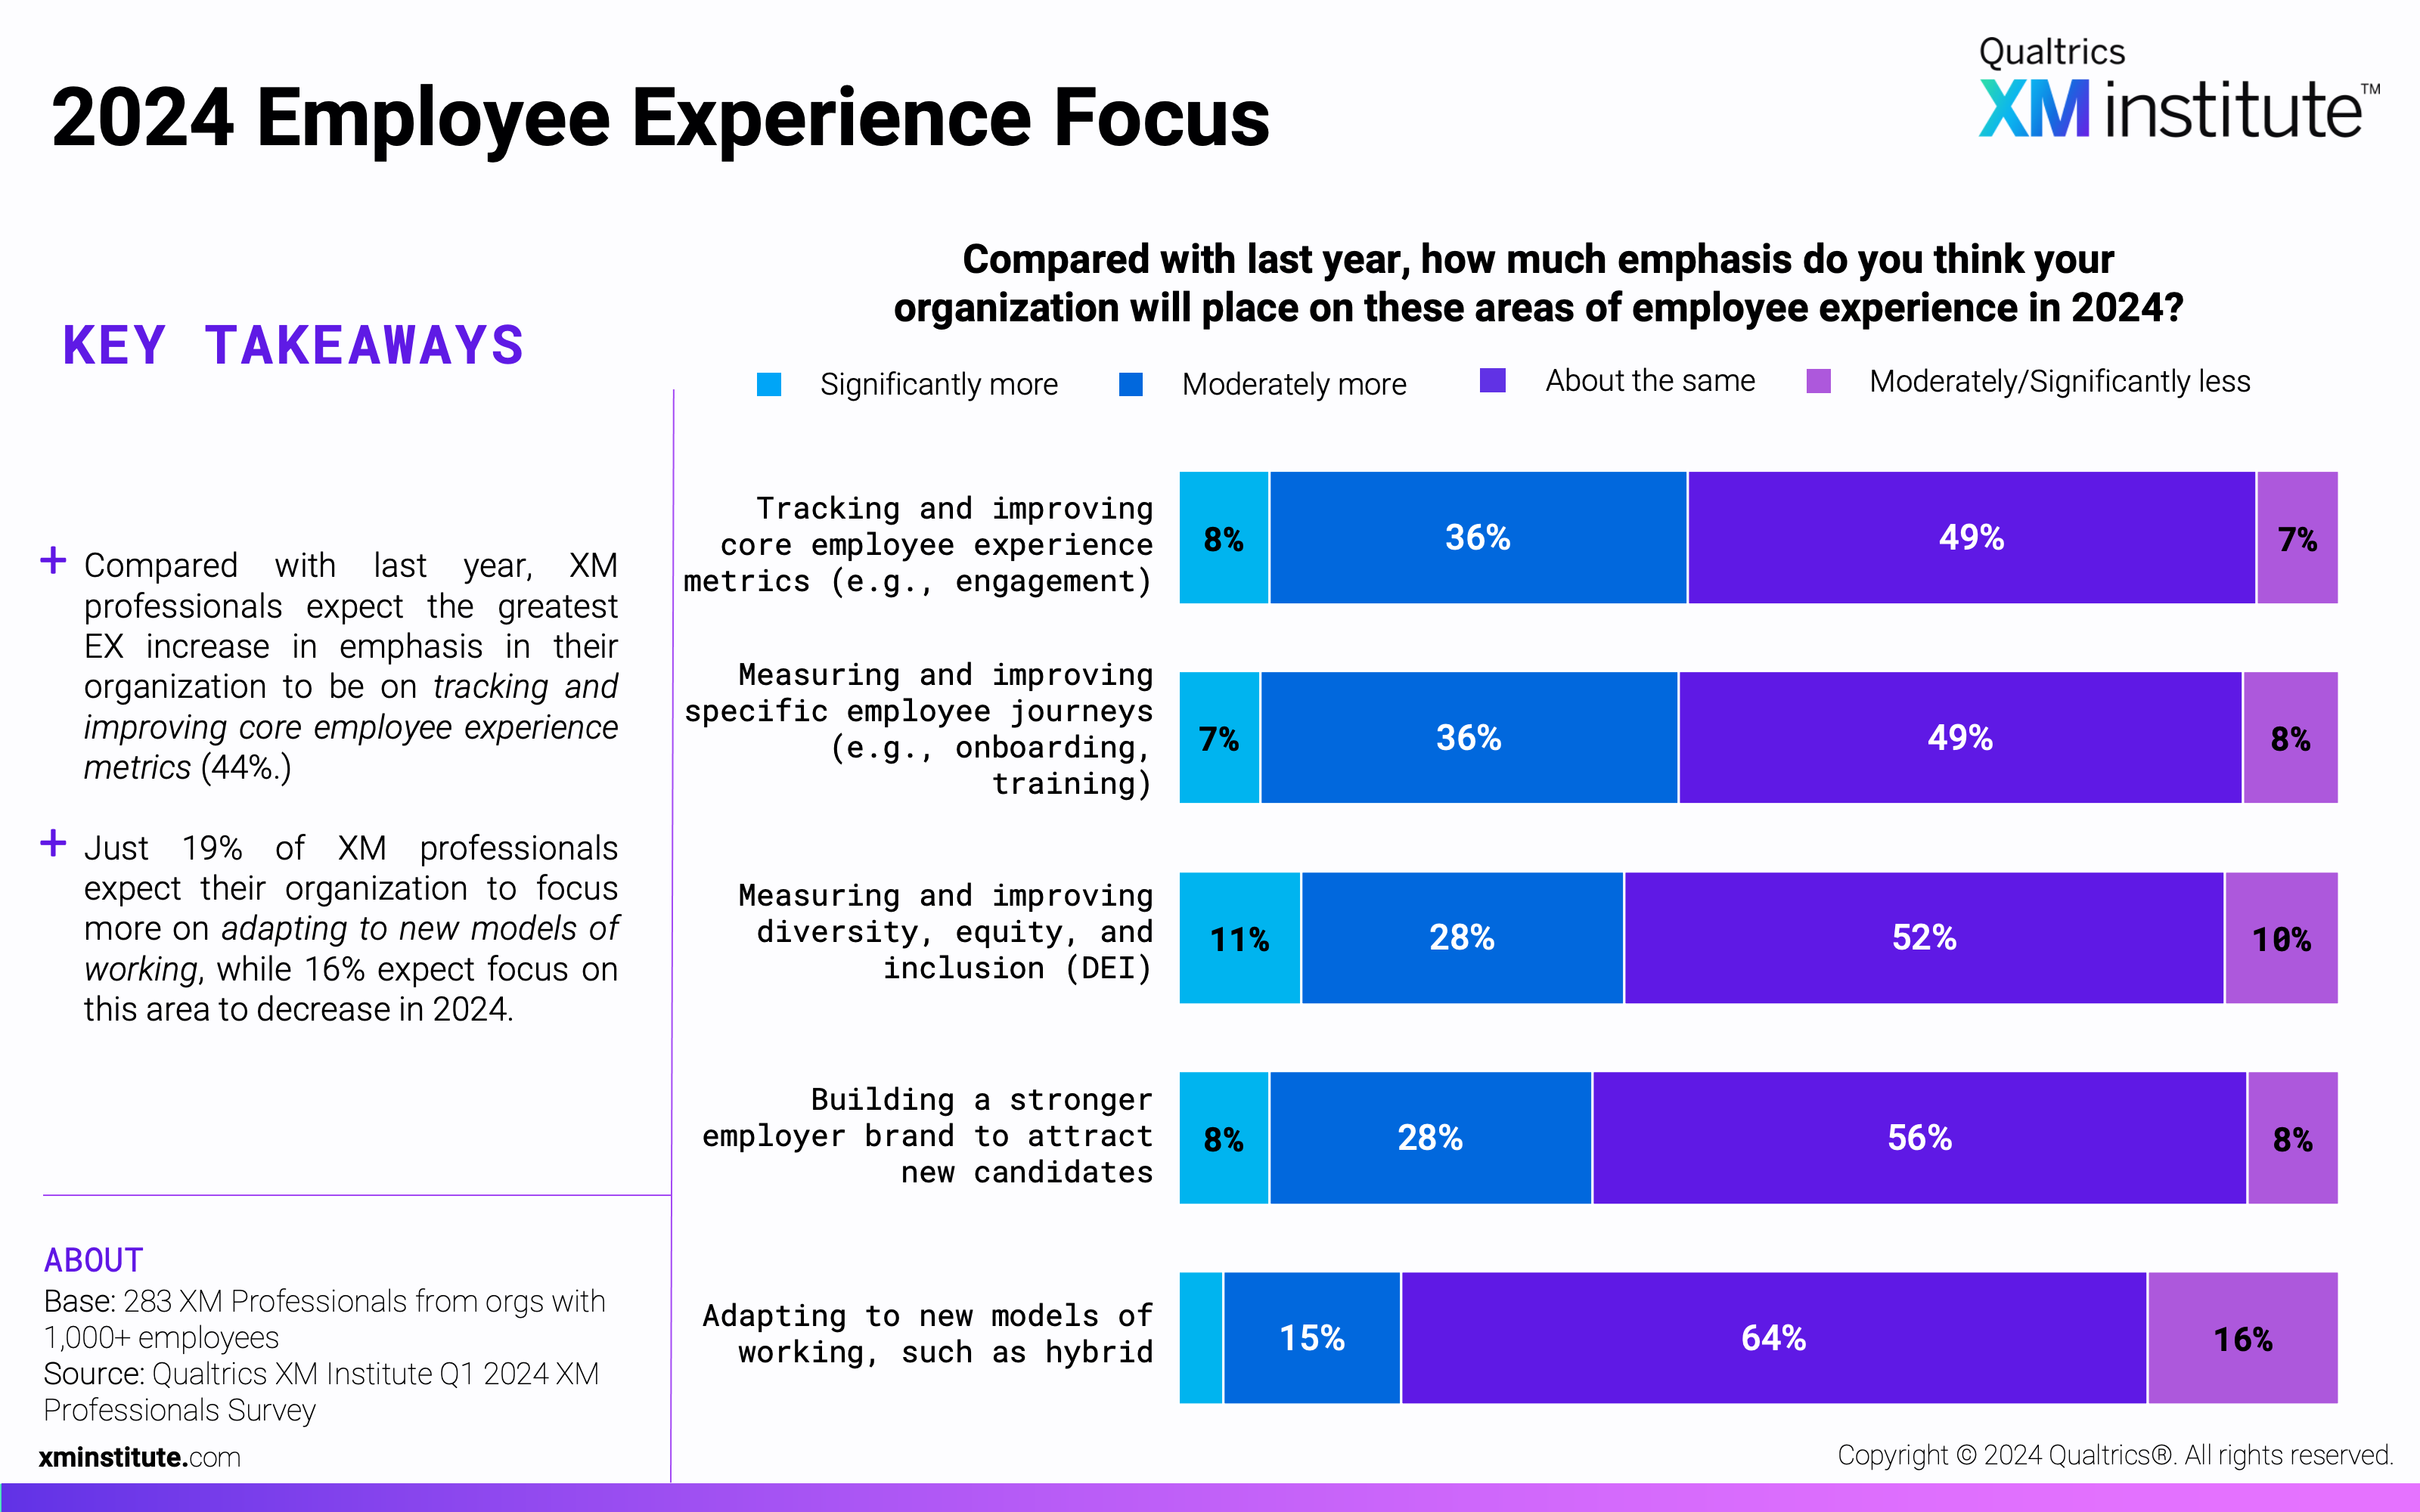 This chart shows how much emphasis respondents think their organization will place on 5 areas of employee experience in 2024 compared to in 2023. 